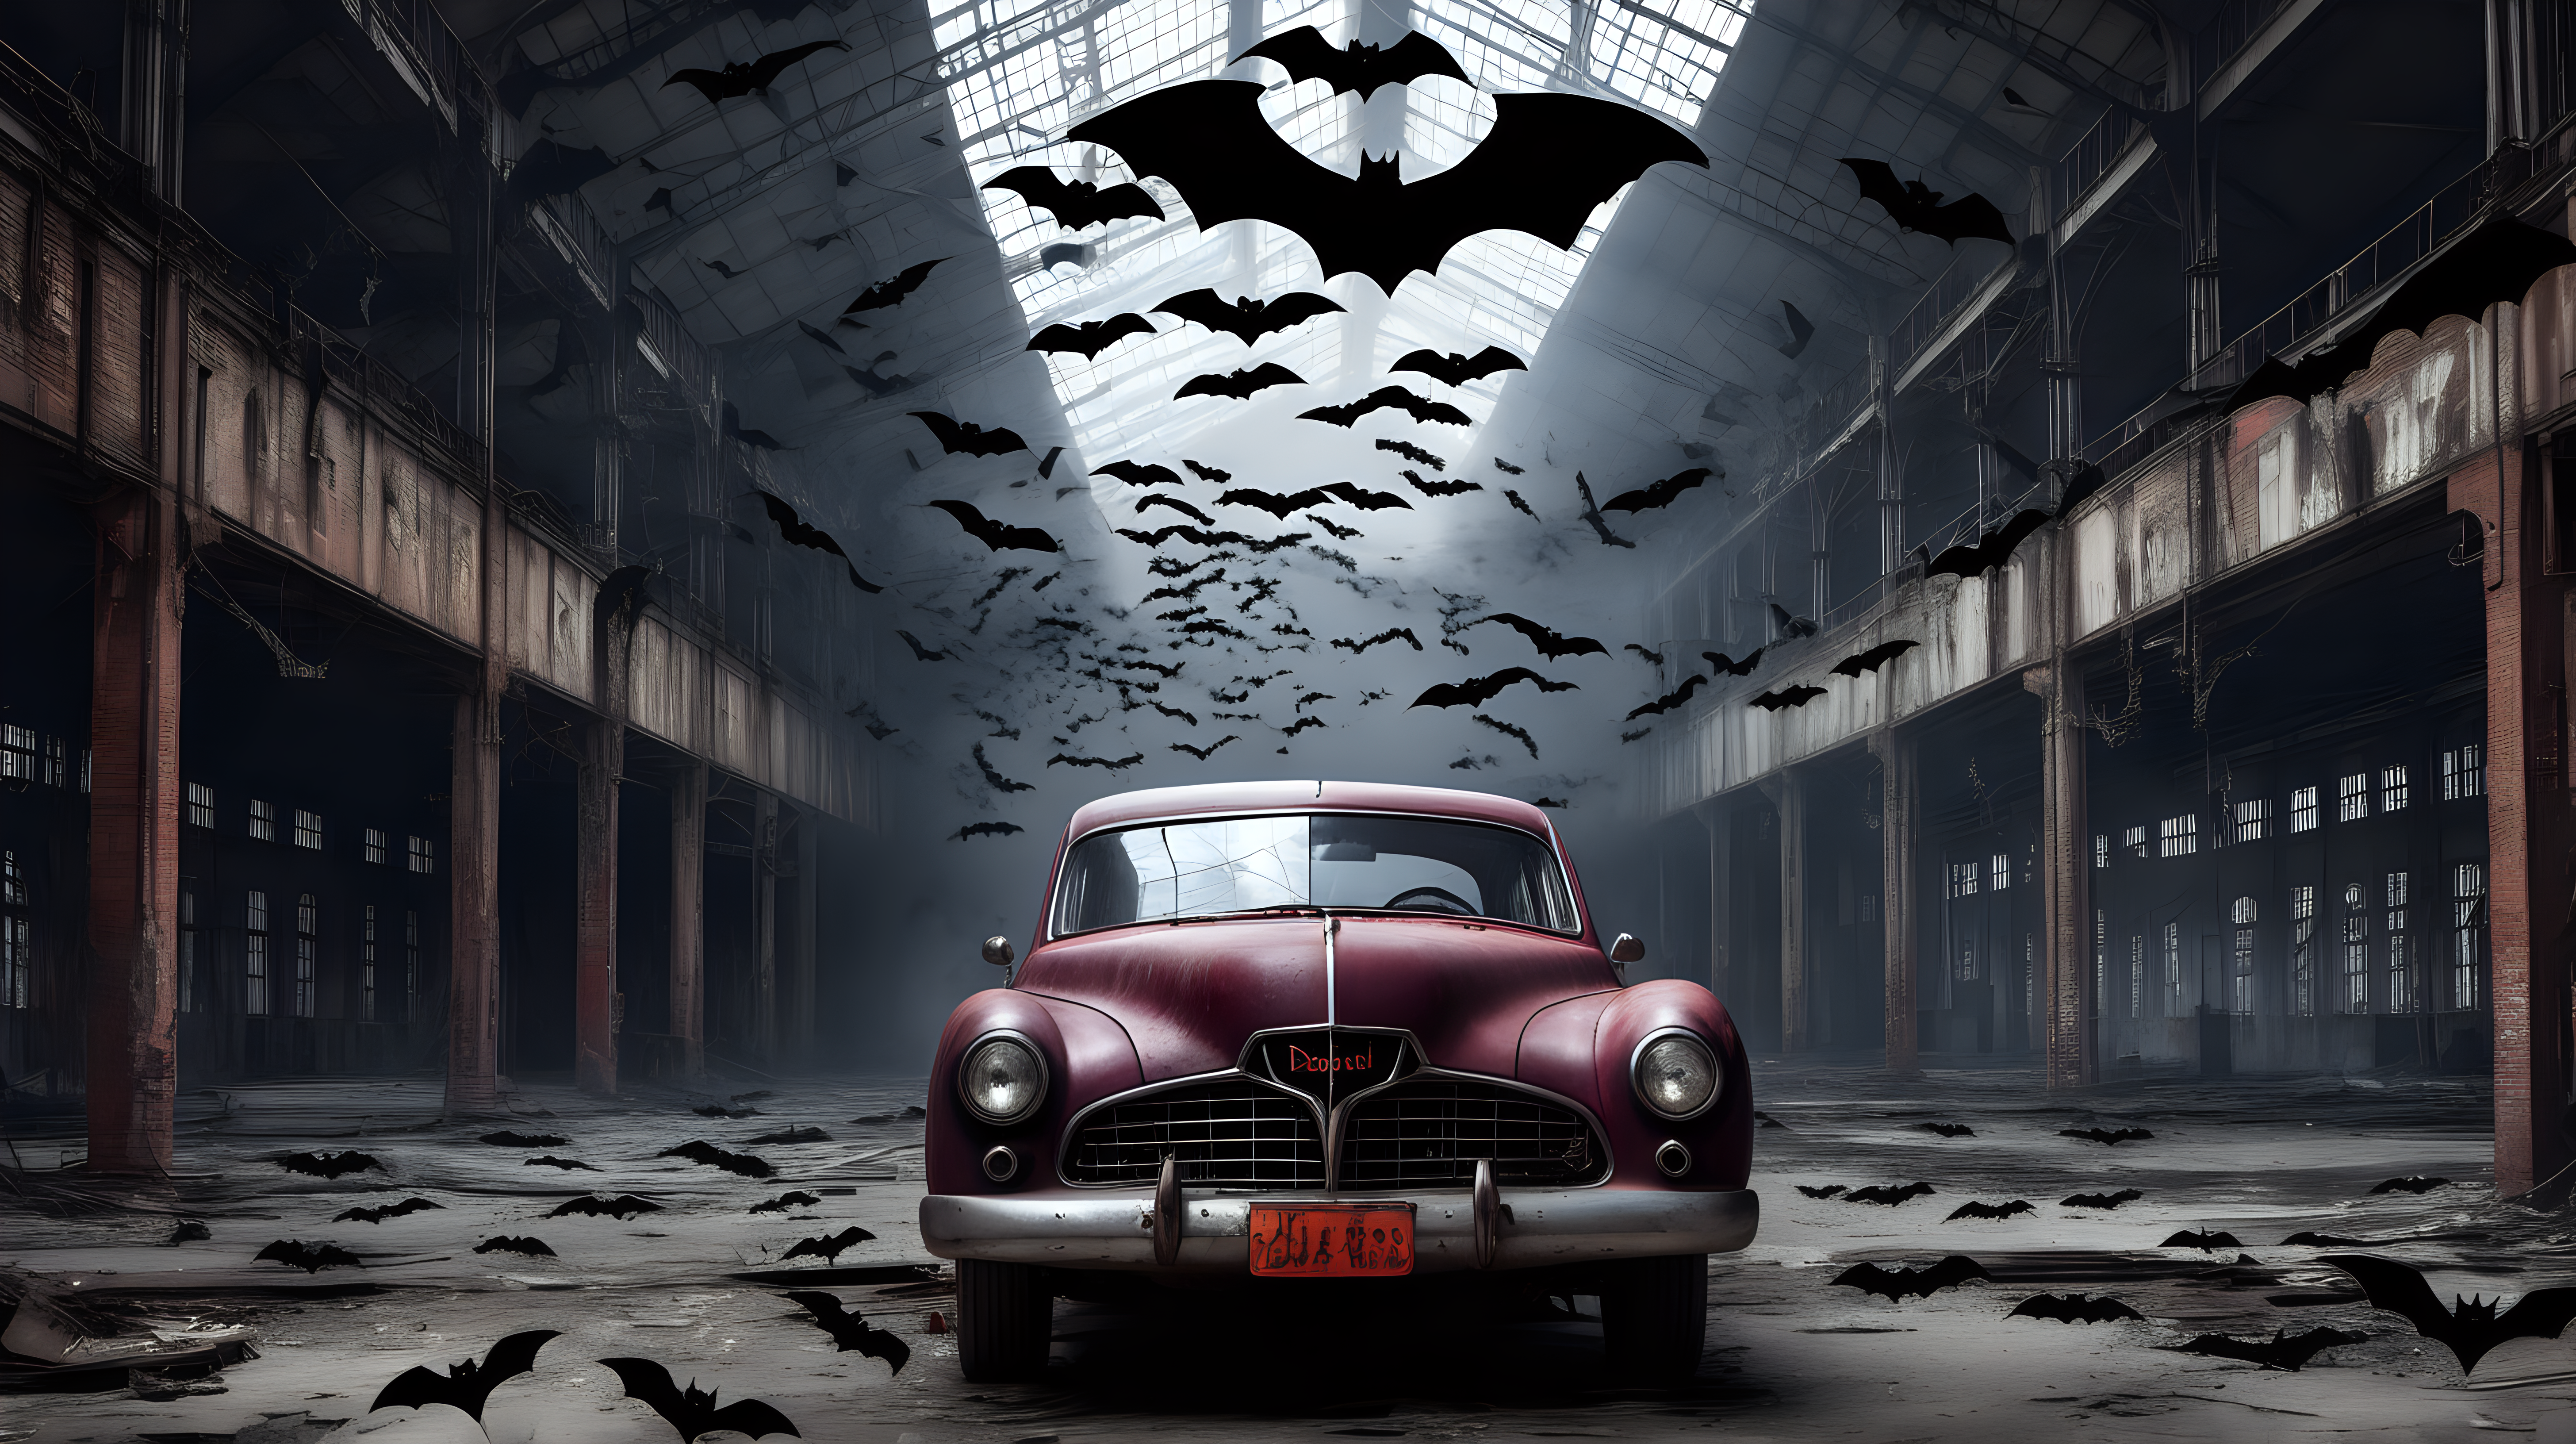 Dracula in an abandon car factory with bats flying overhead